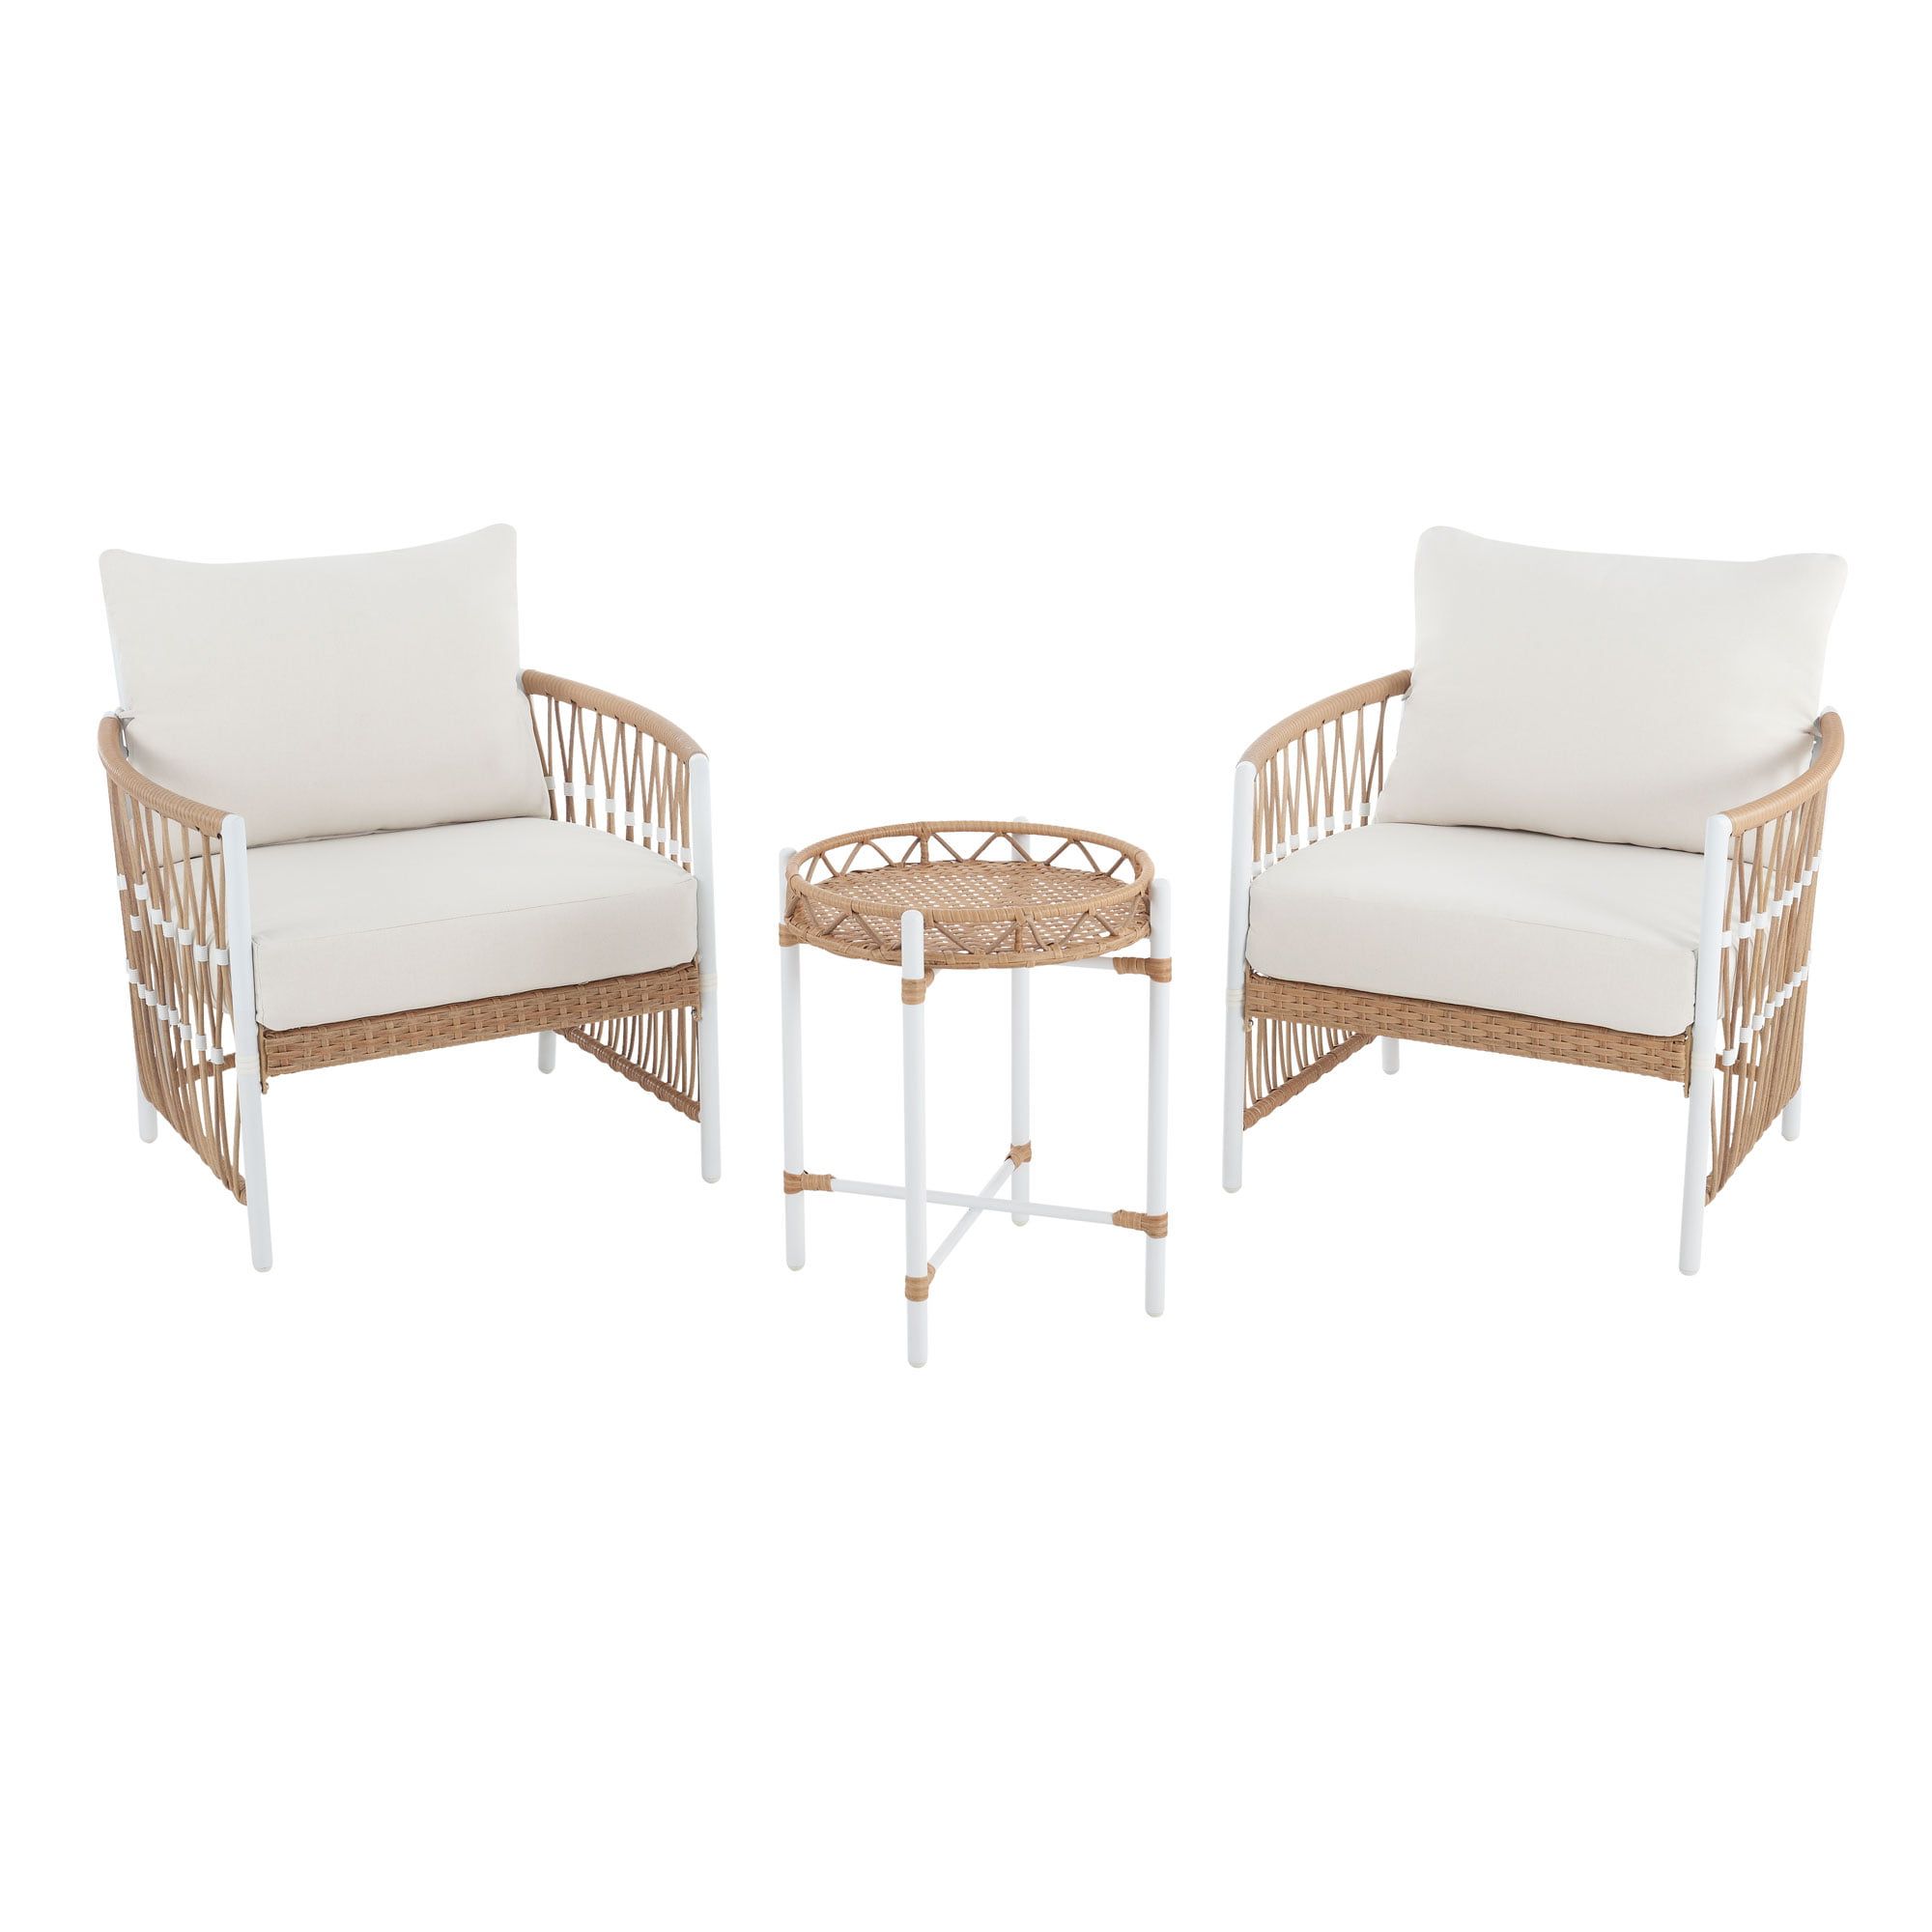 Well Known Buy Better Homes & Gardens Lilah Outdoor Wicker 3 Piece Stationary Chat Set,  Off White Online At Lowest Price In Ubuy France. 984723064 For Outdoor Stationary Chat Set (Photo 11 of 15)